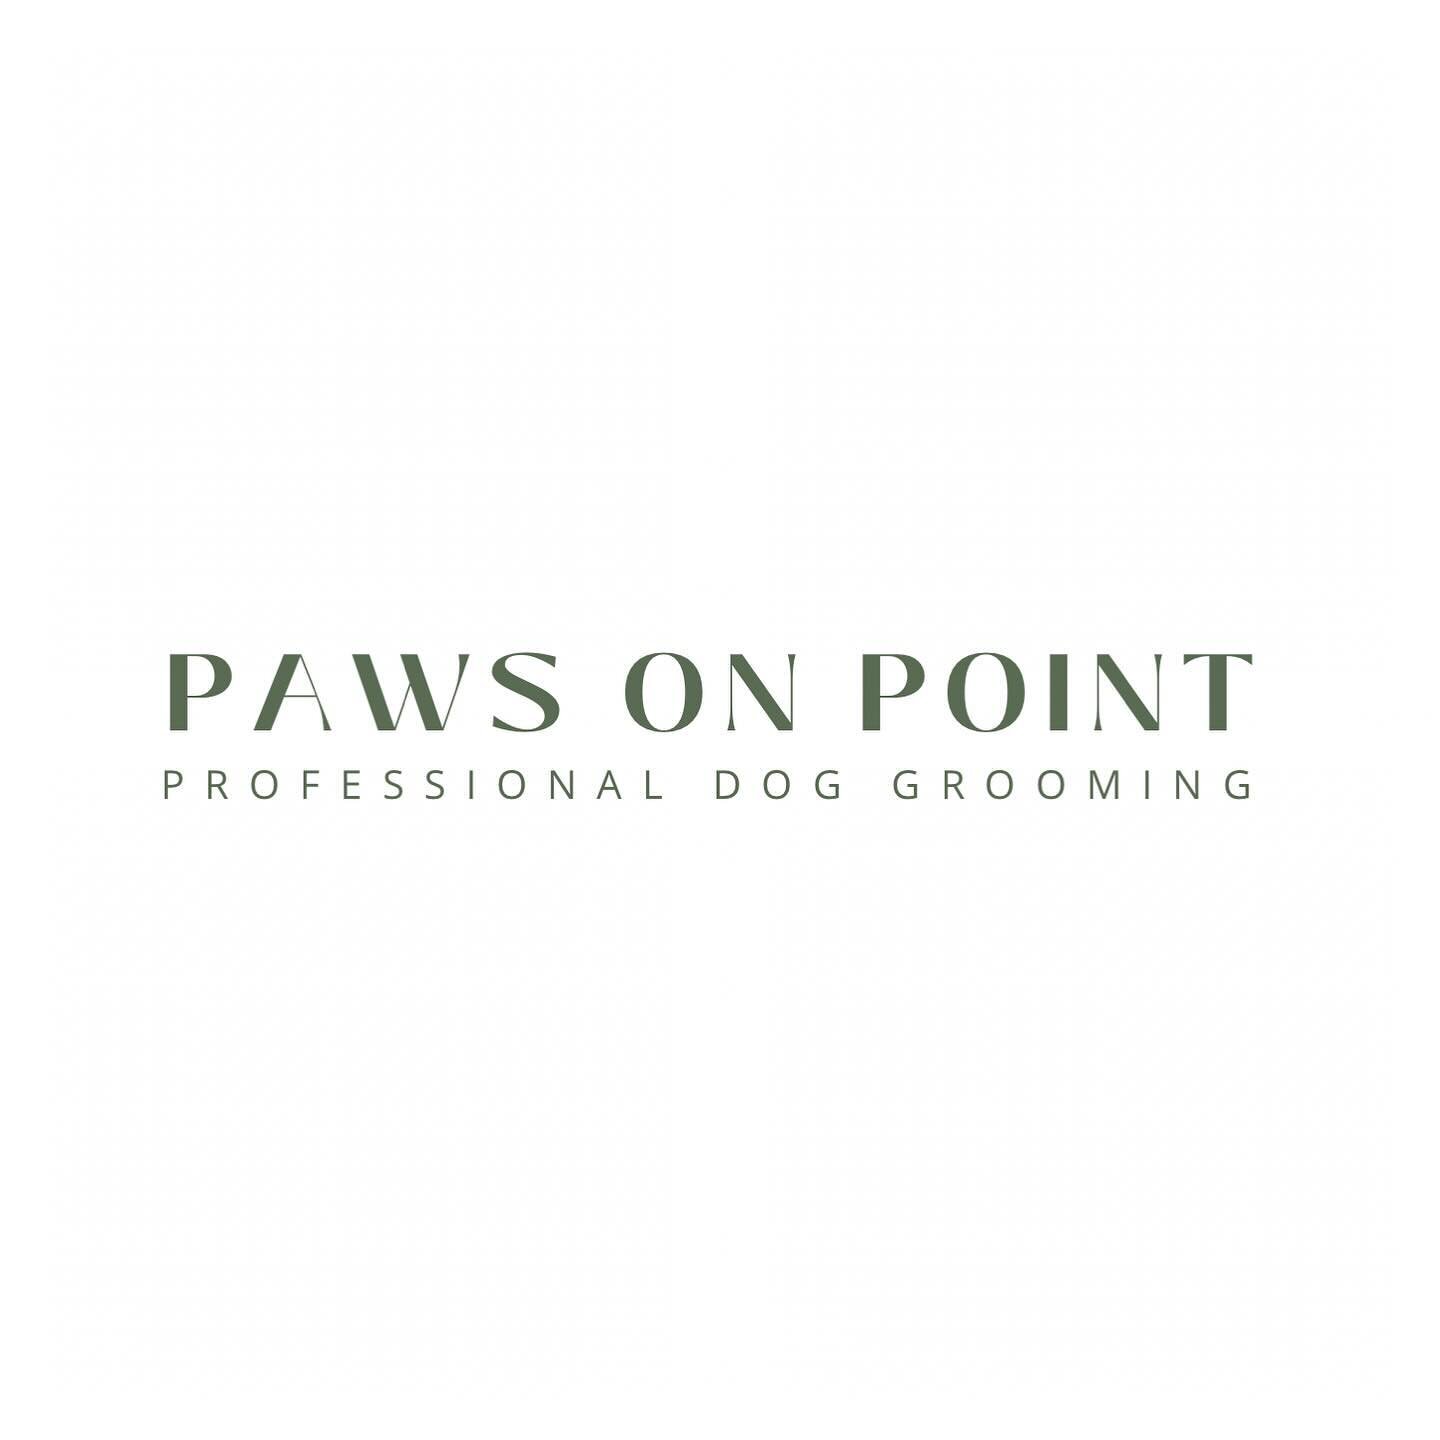 Introducing our rebrand and new location! ✨

Welcome to Paws on Point &ndash; Your premier North Shore destination for professional dog grooming.&nbsp;Located in Birkenhead, quietly tucked behind Parkhill Veterinary Hospital, our boutique salon is pr